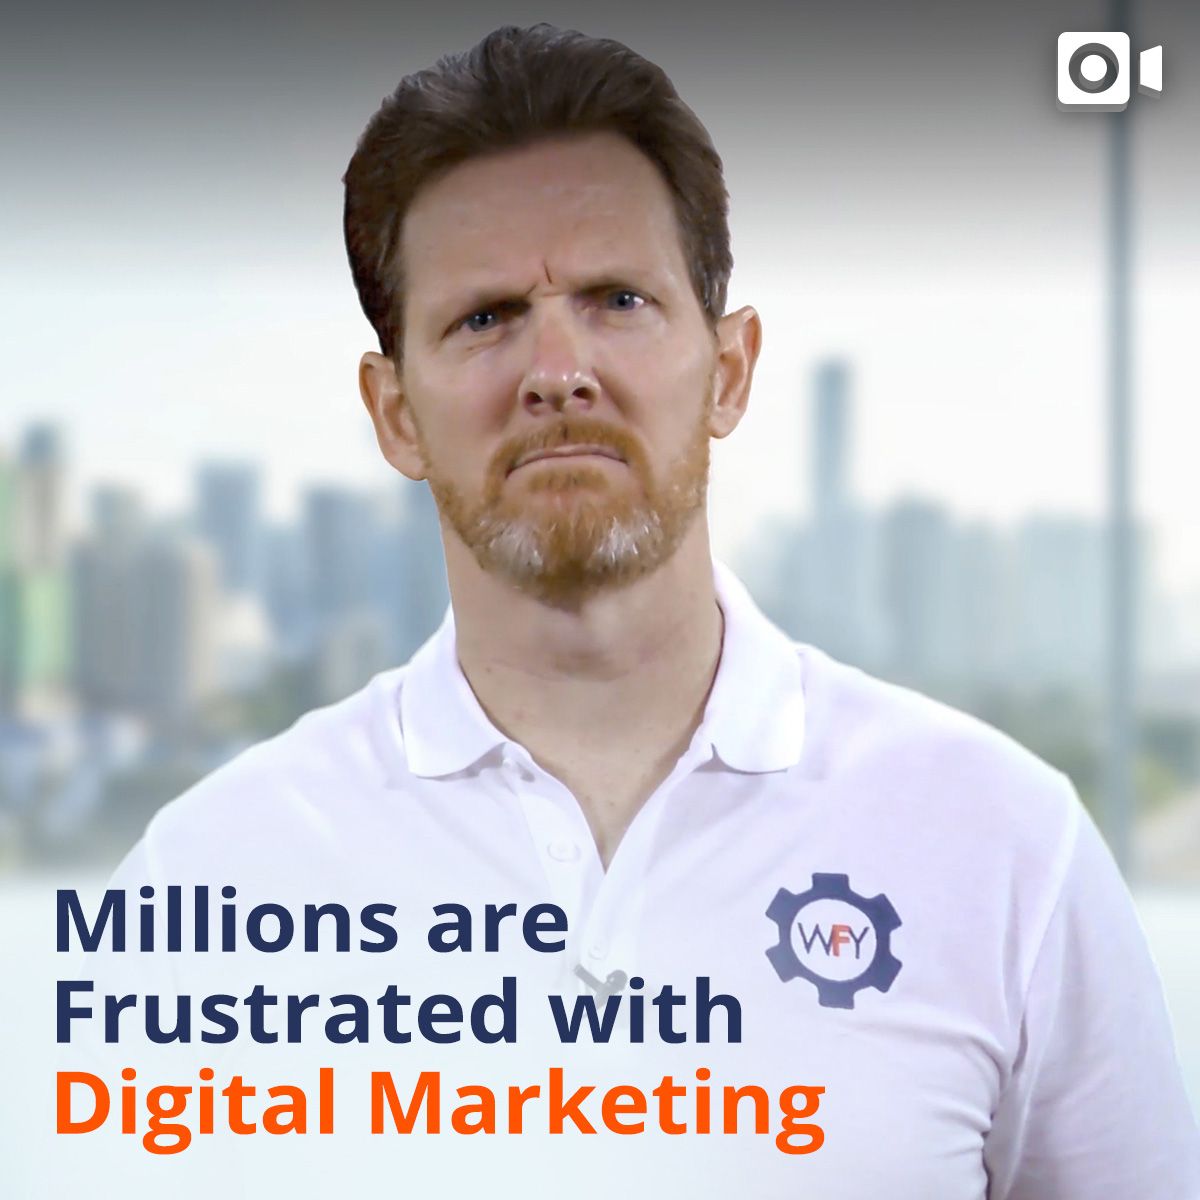 Millions are Frustrated with Digital Marketing